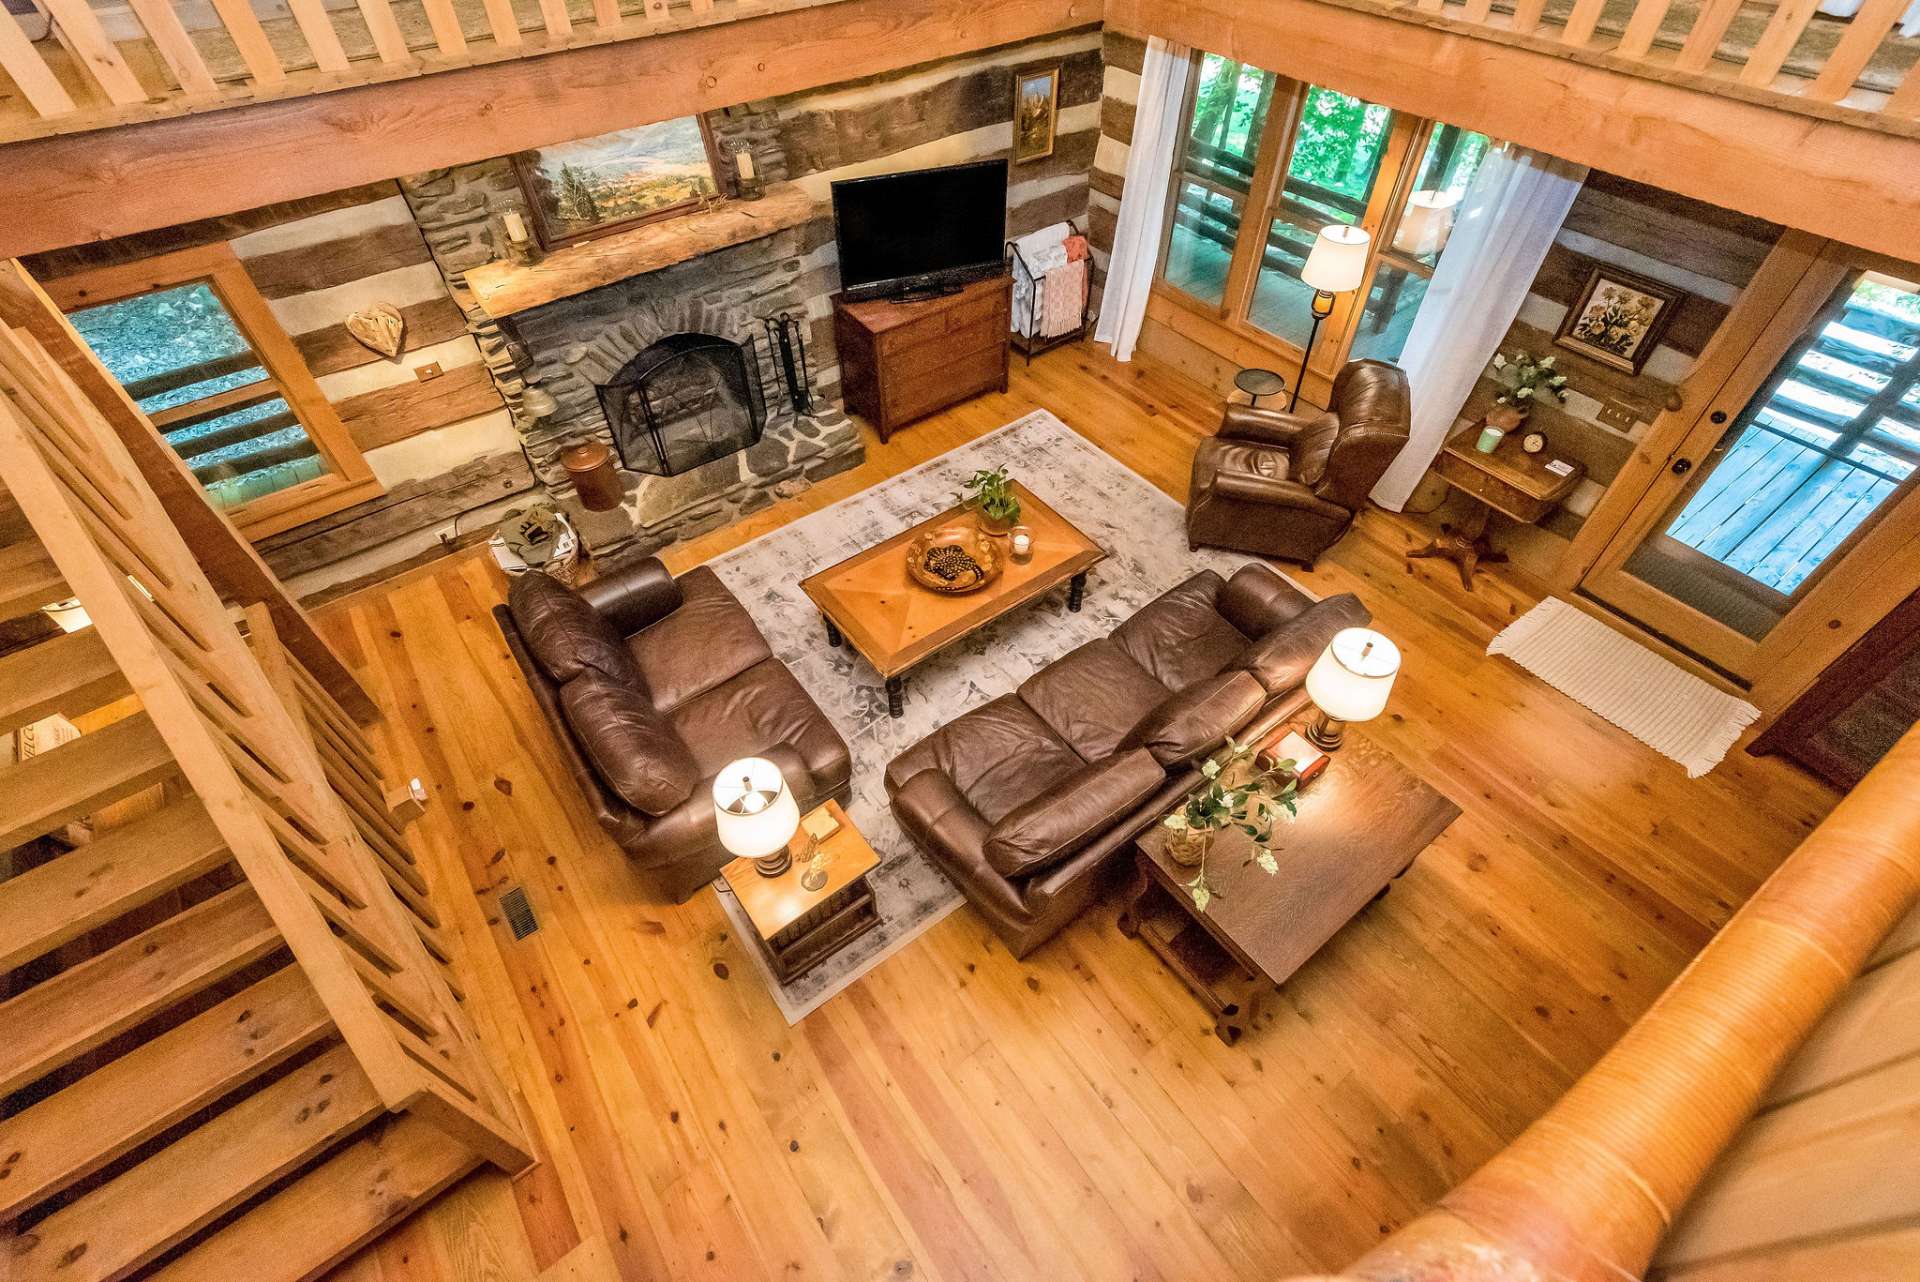 Your heart will feel full looking down at your family and friends spending time together in your mountain cabin.